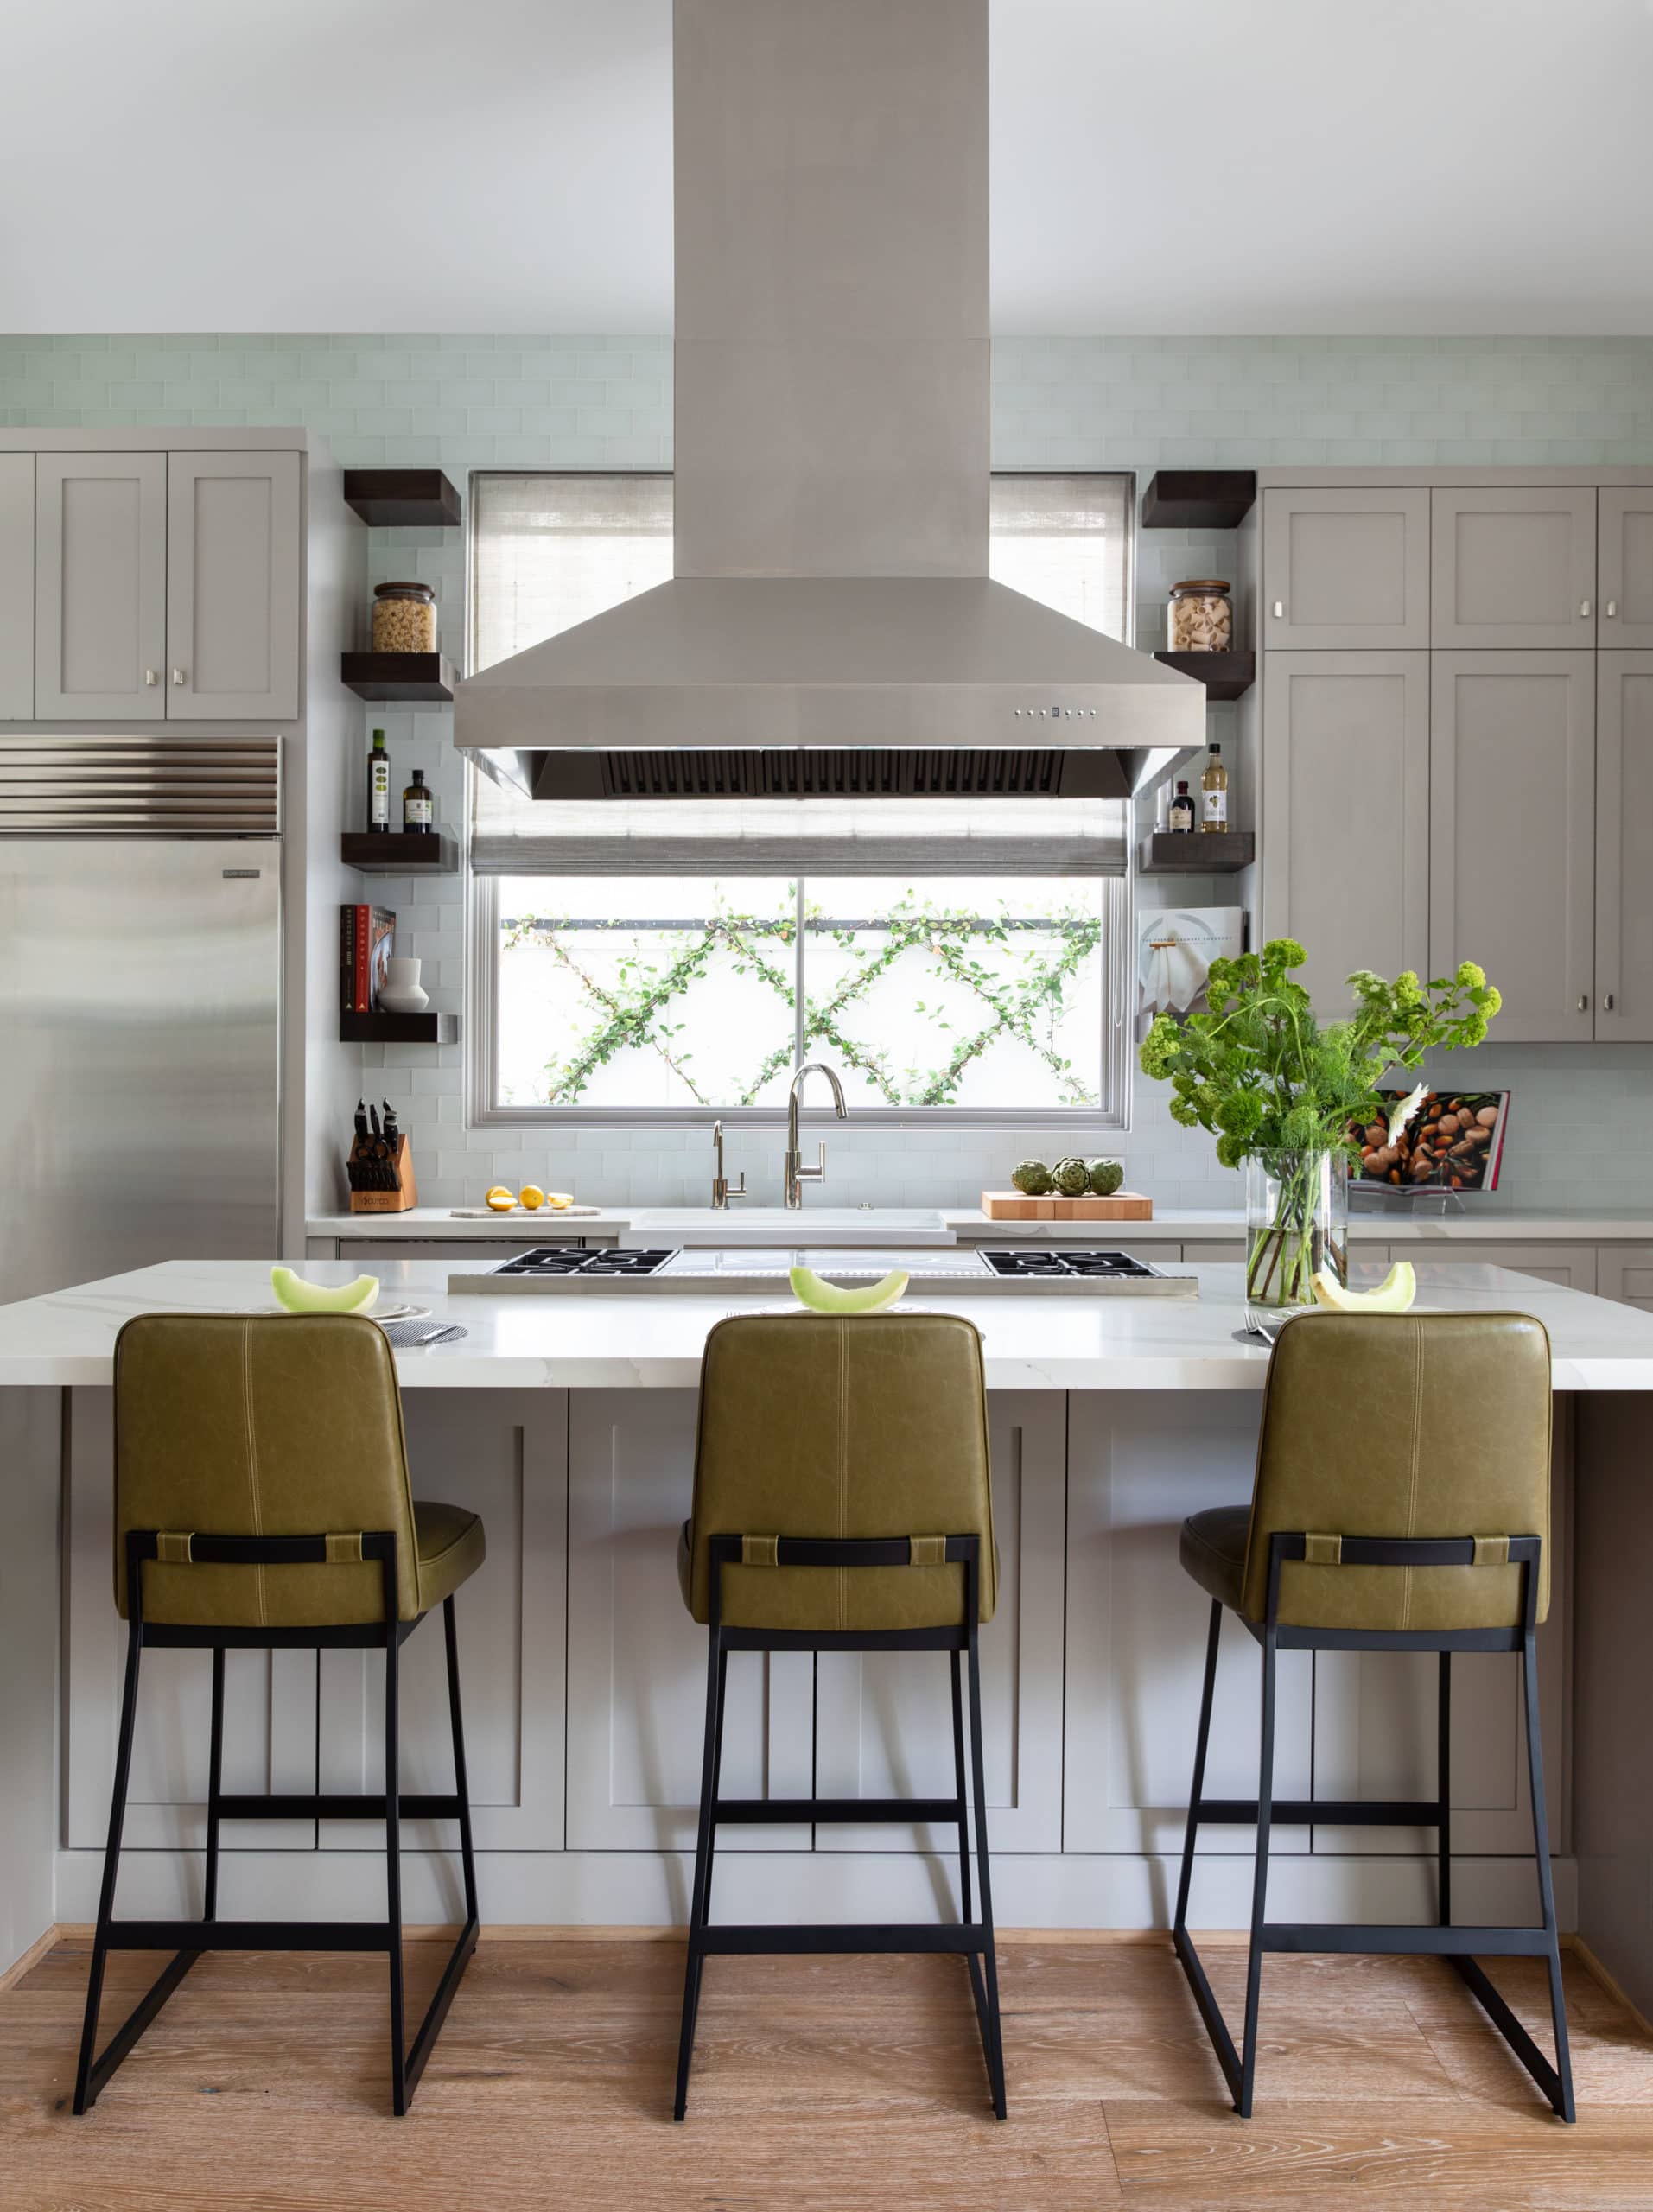 The kitchen at Dunstan with wall tile, barstools, and a large vent hood